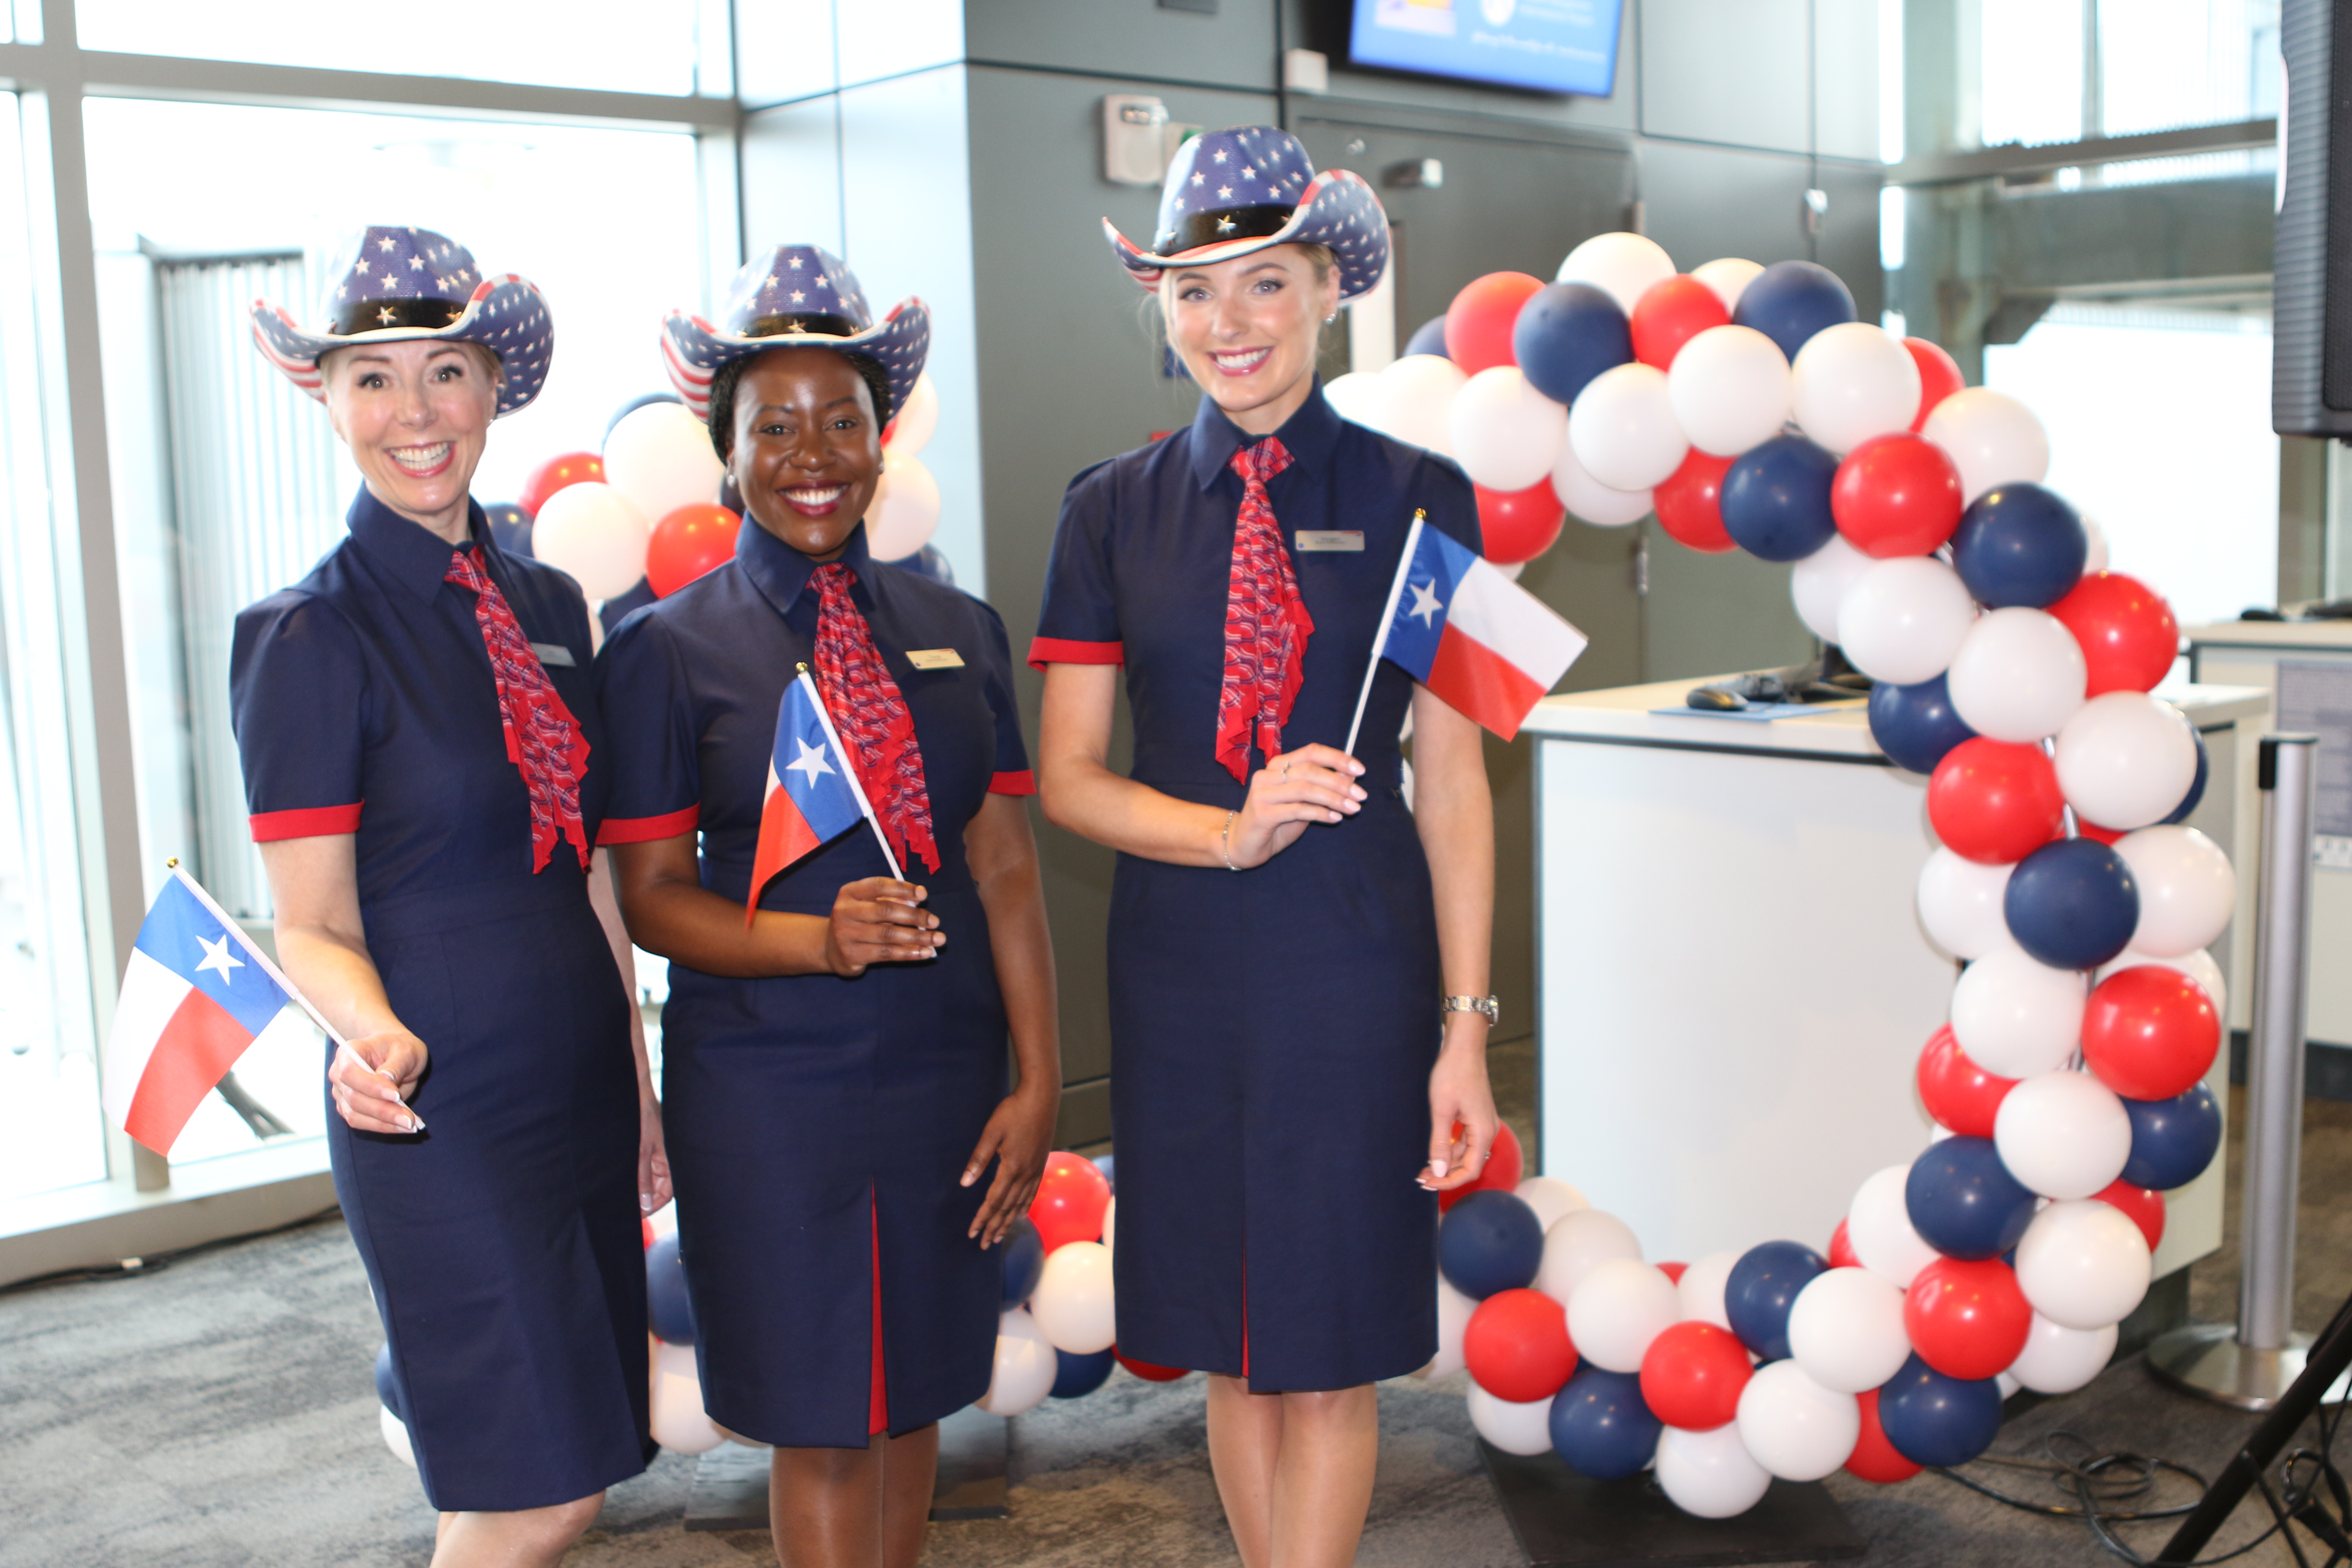 Photo of 3 British Airways flight attendants standing and posing for a photo at the AUS/British Airways 10 year anniversary celebration. They're holding tiny Texas flags.